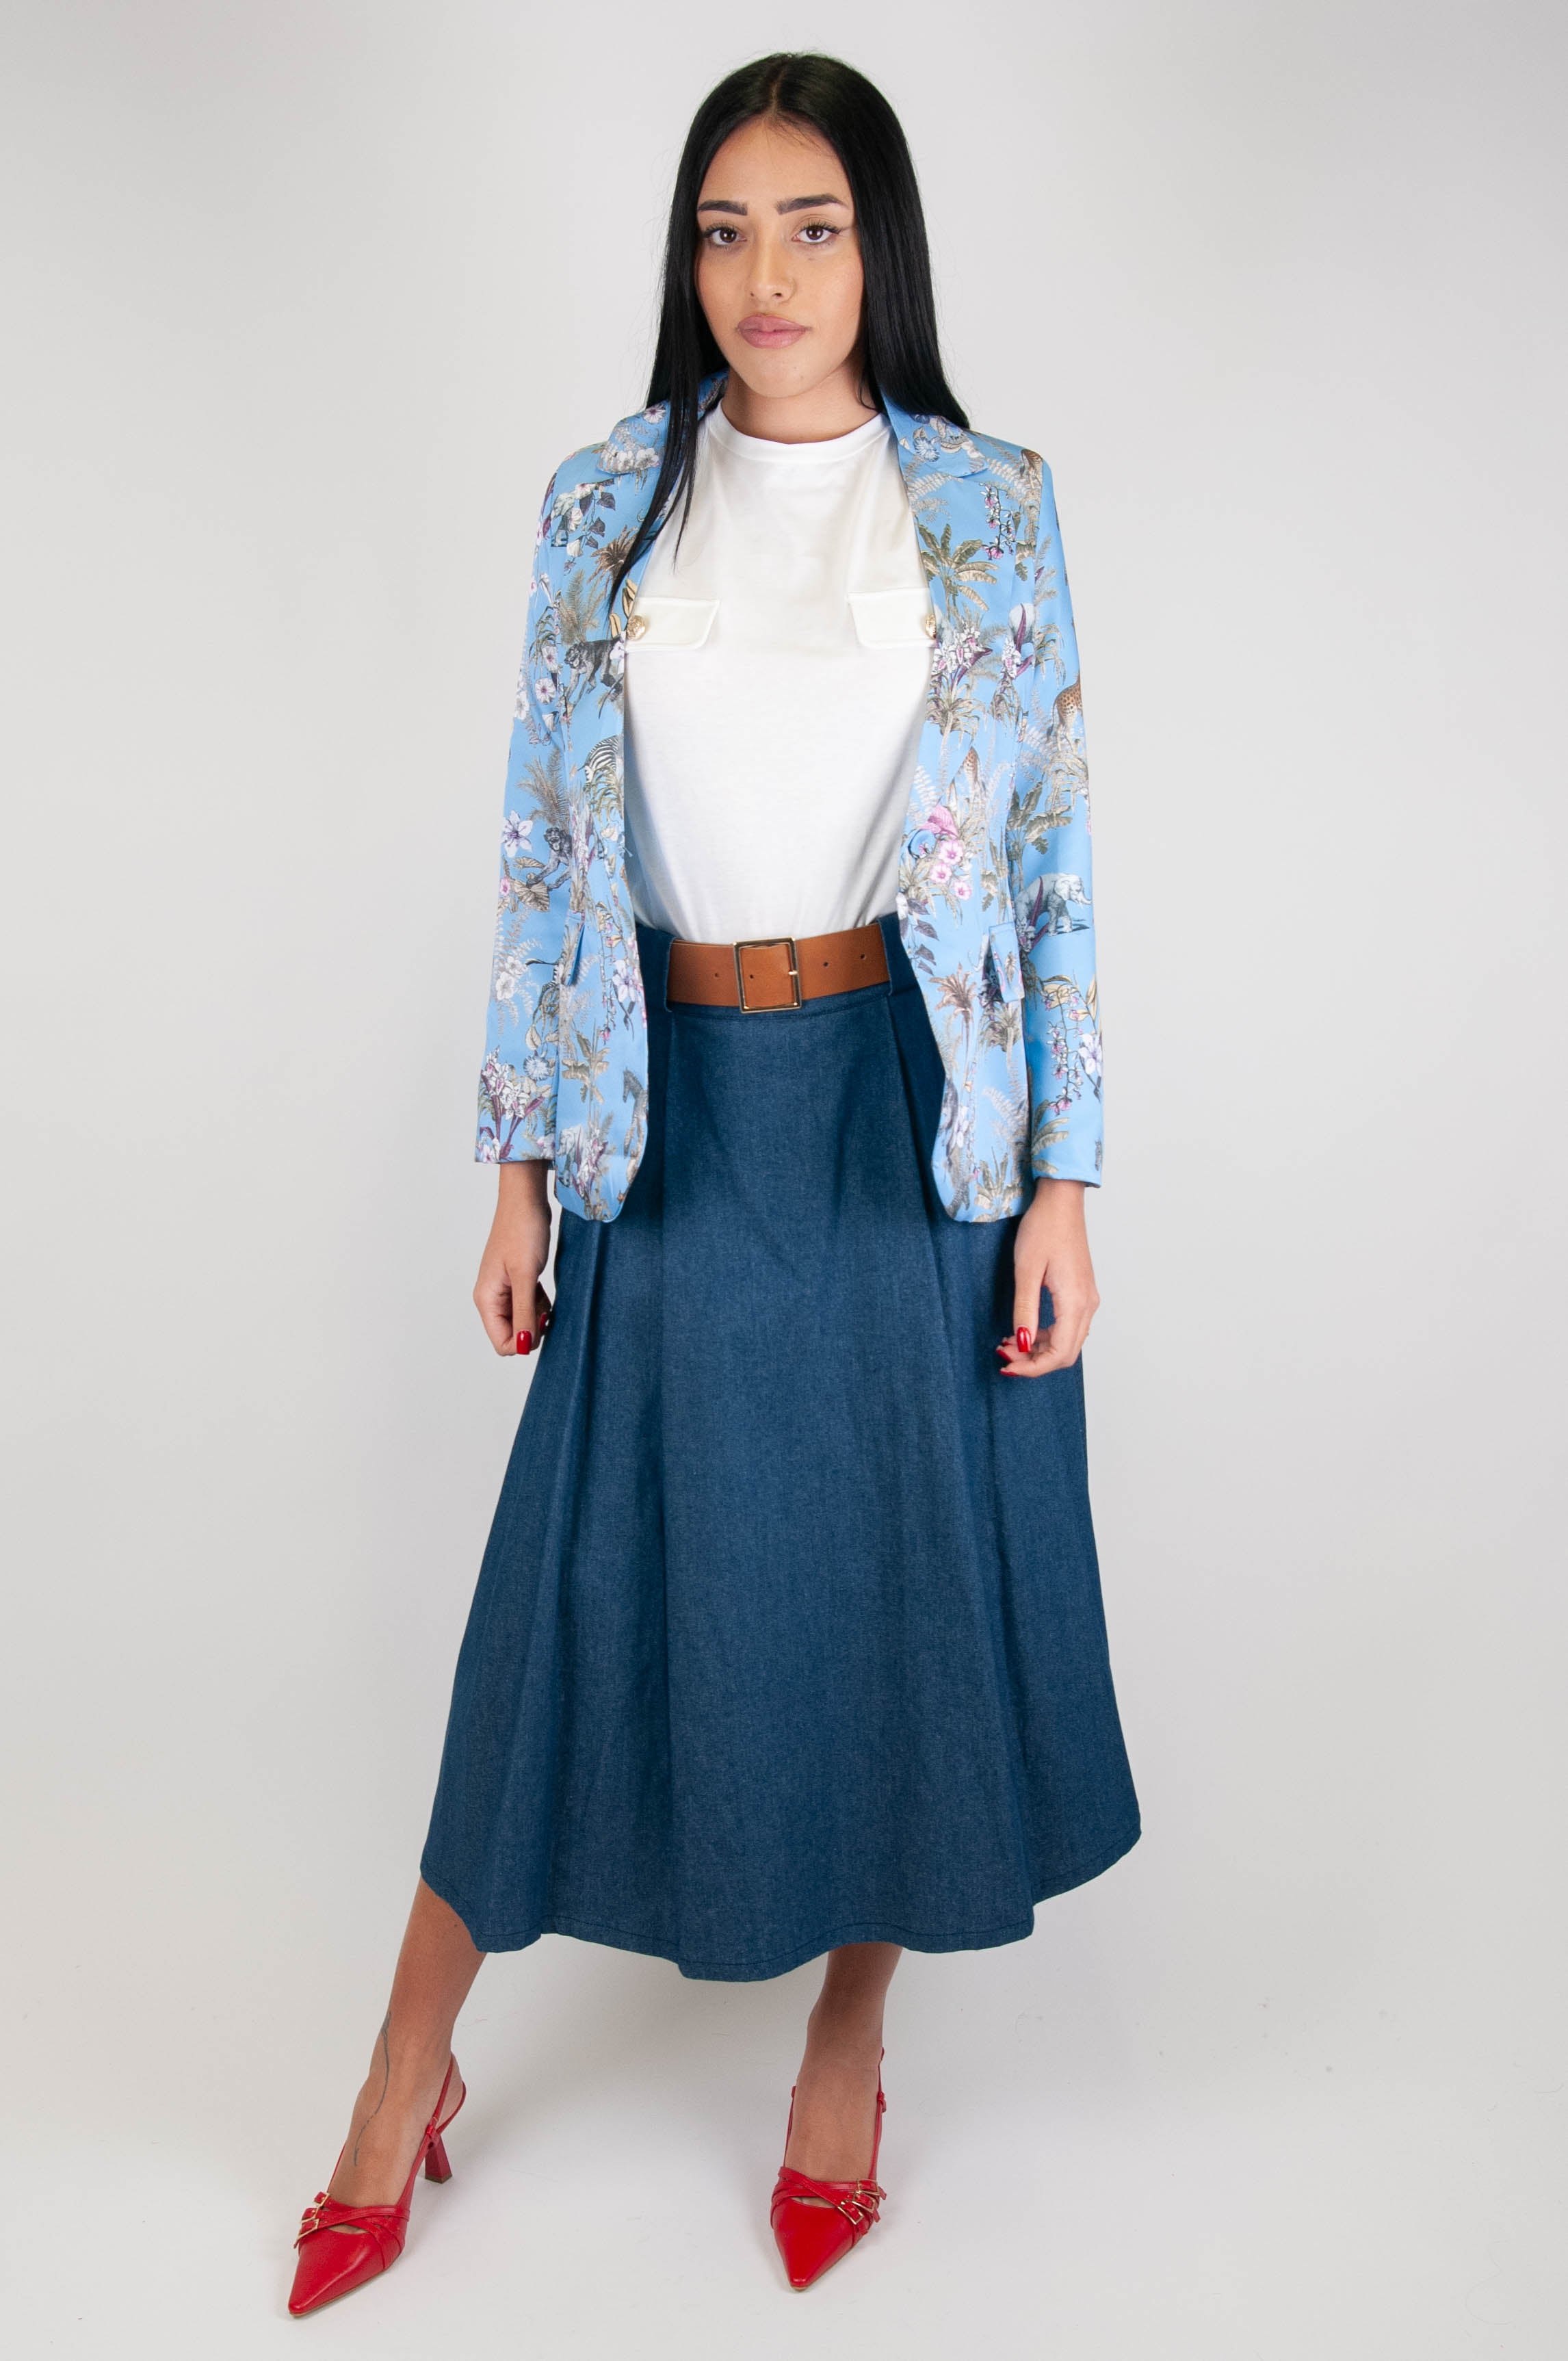 Tension in - Denim skirt with pleats